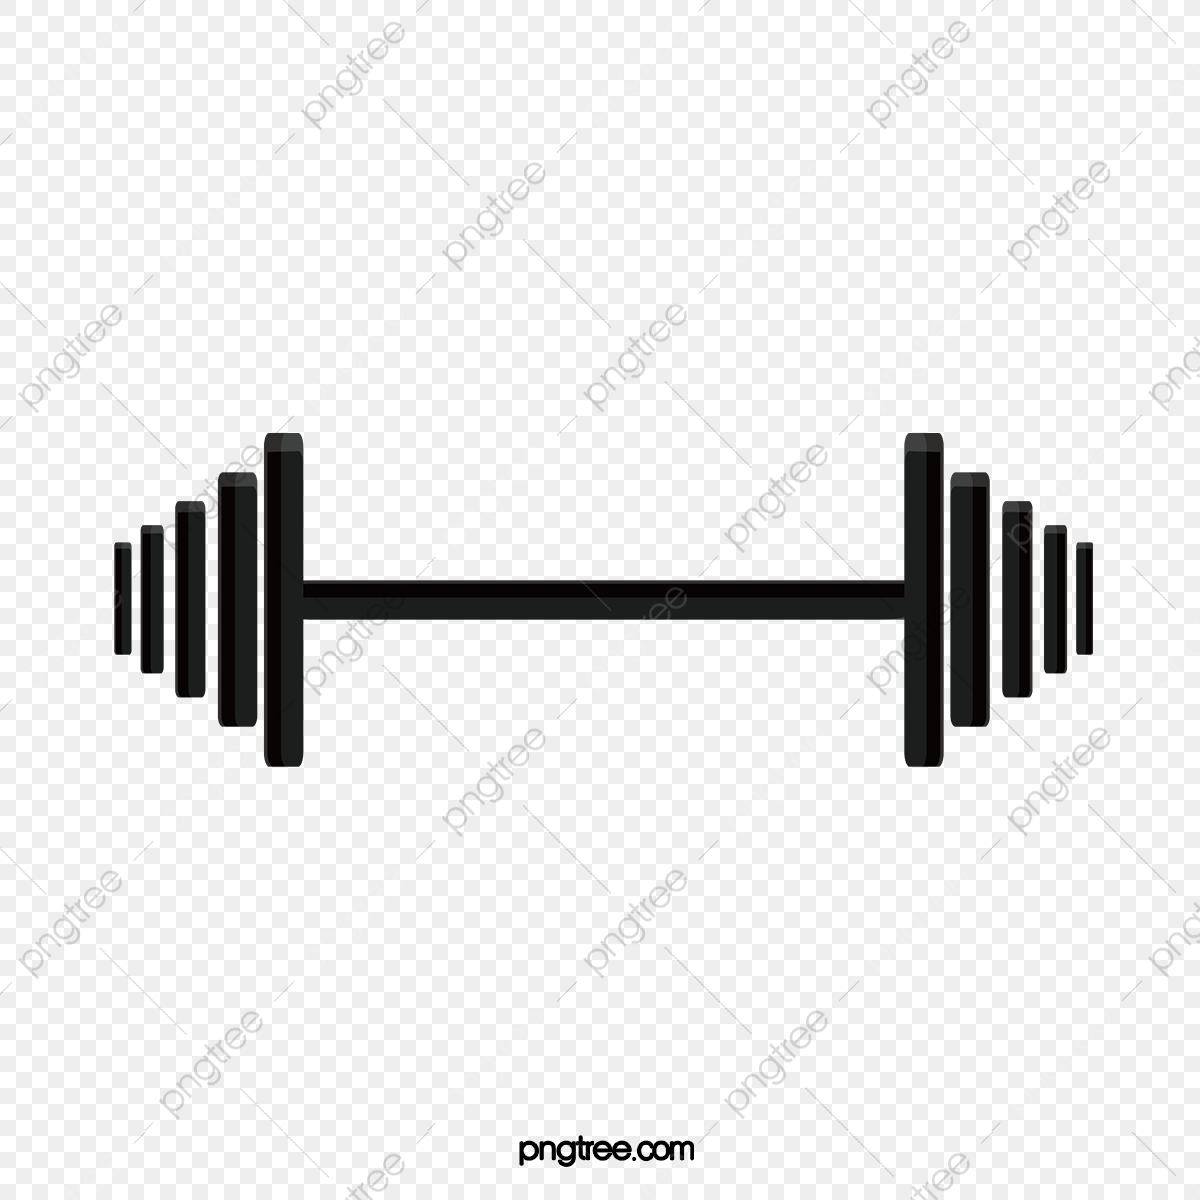 Dumbbell barbell png . Dumbbells clipart icon